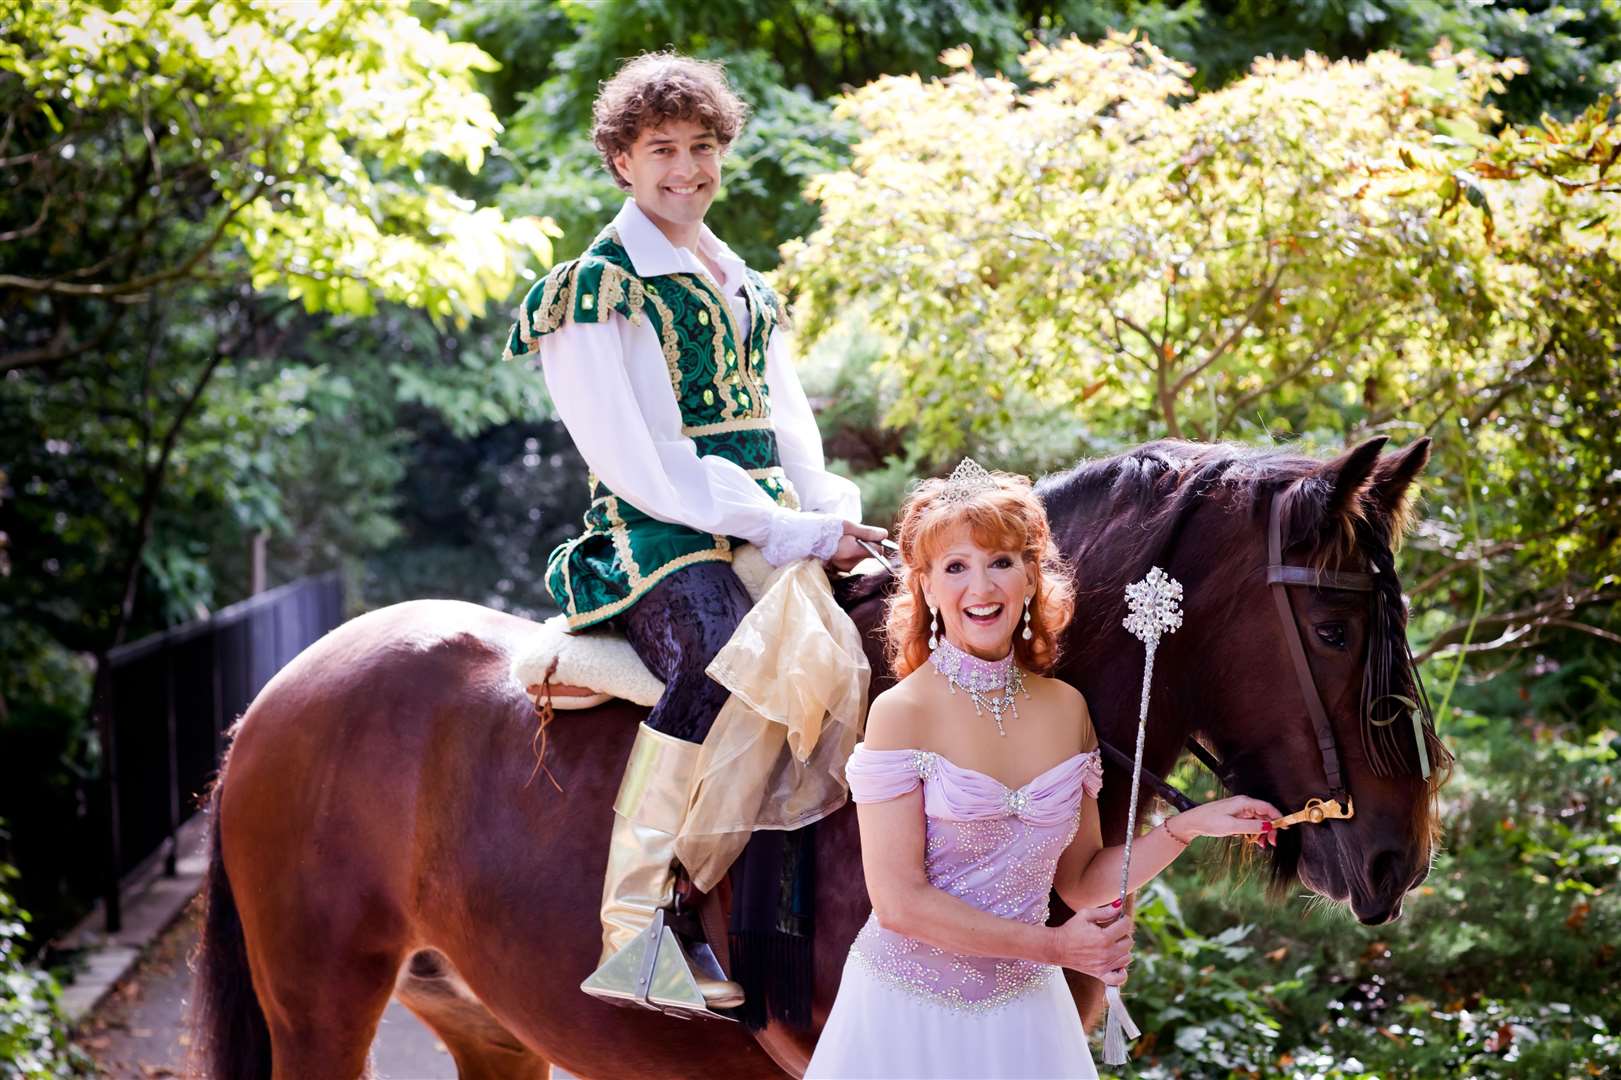 Lee Mead and Bonnie Langford at the launch of the Churchill Theatre's panto, Sleeping Beauty Picture: Kate Darkins